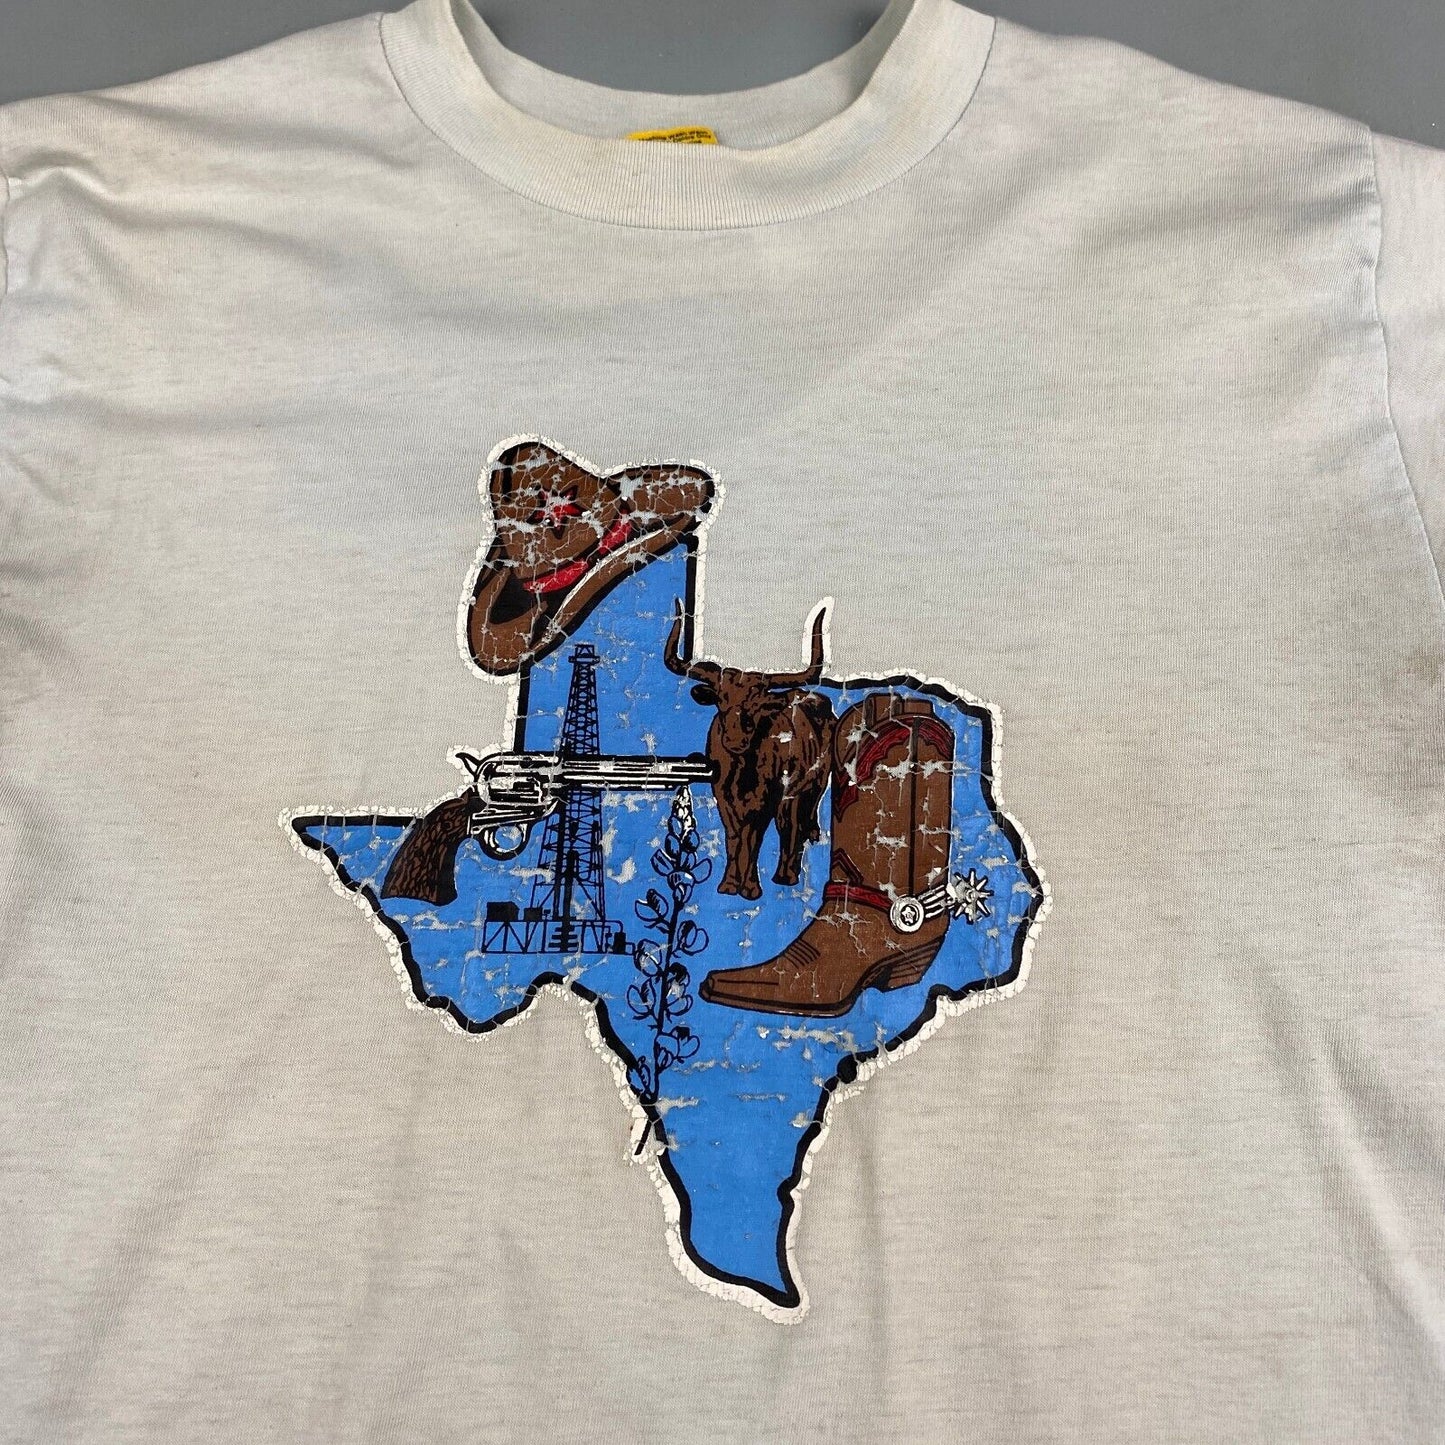 VINTAGE 70s/80s Texas State Faded Light Blue T-Shirt sz Small Men Adult